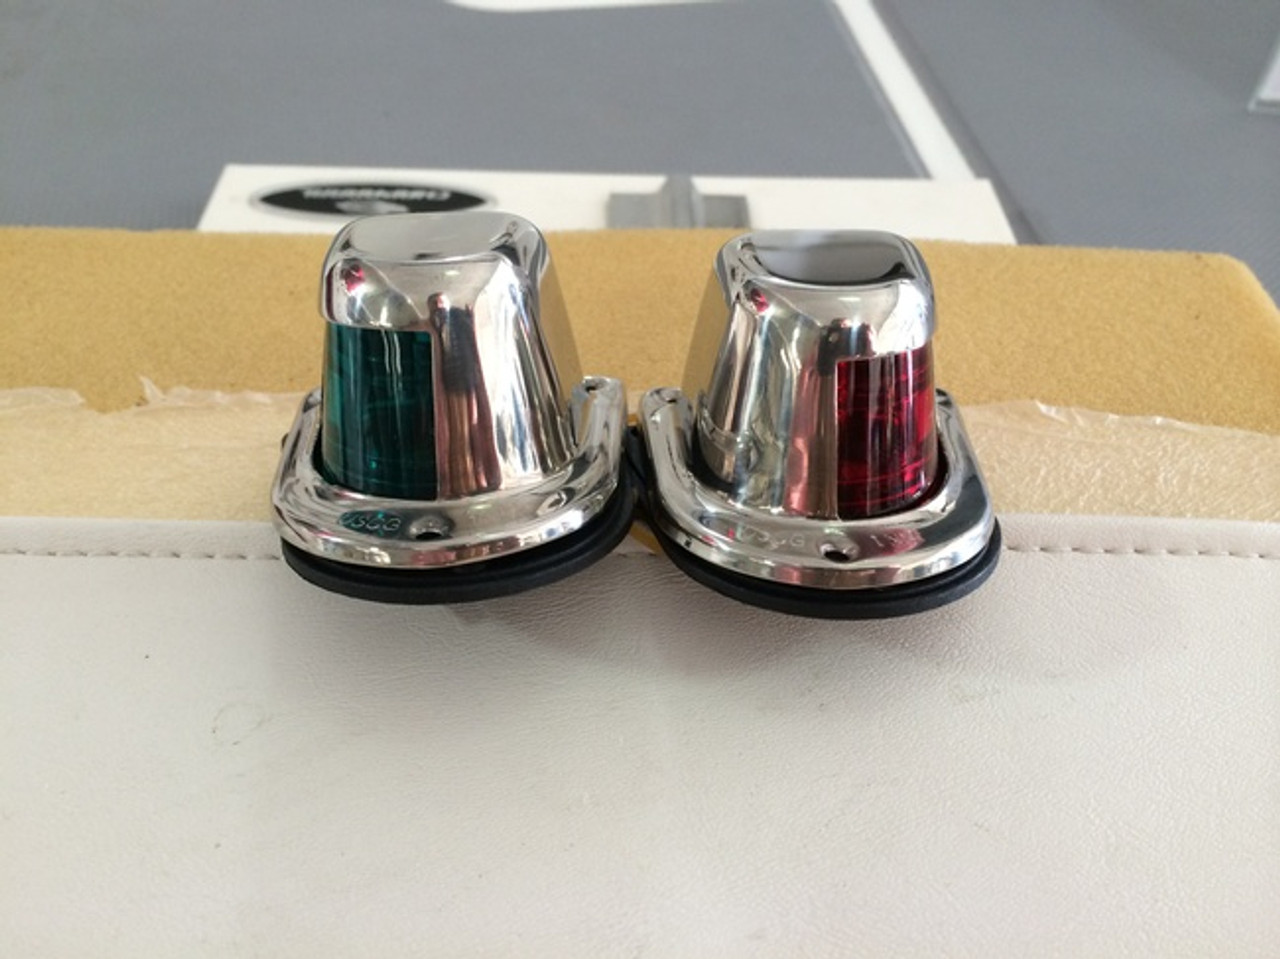 Deck Mount Starboard Navigation Light *In Stock & Ready To Ship!